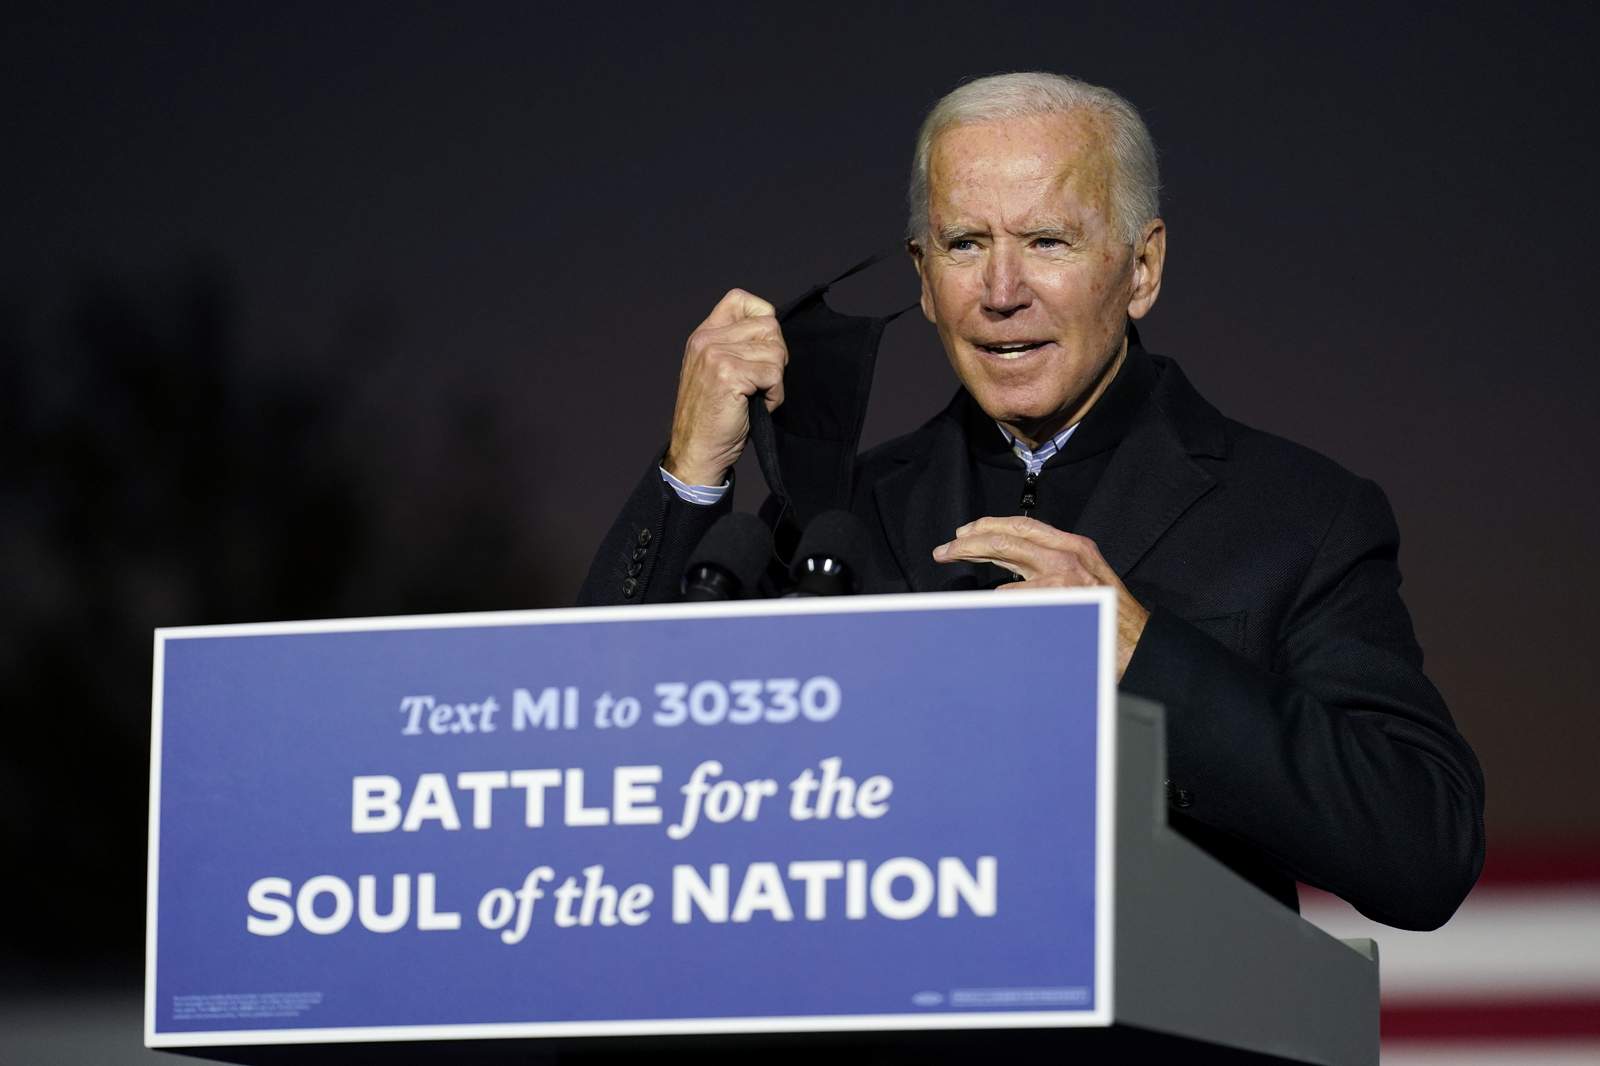 The Latest: Biden unleashes scathing attacks on Trump